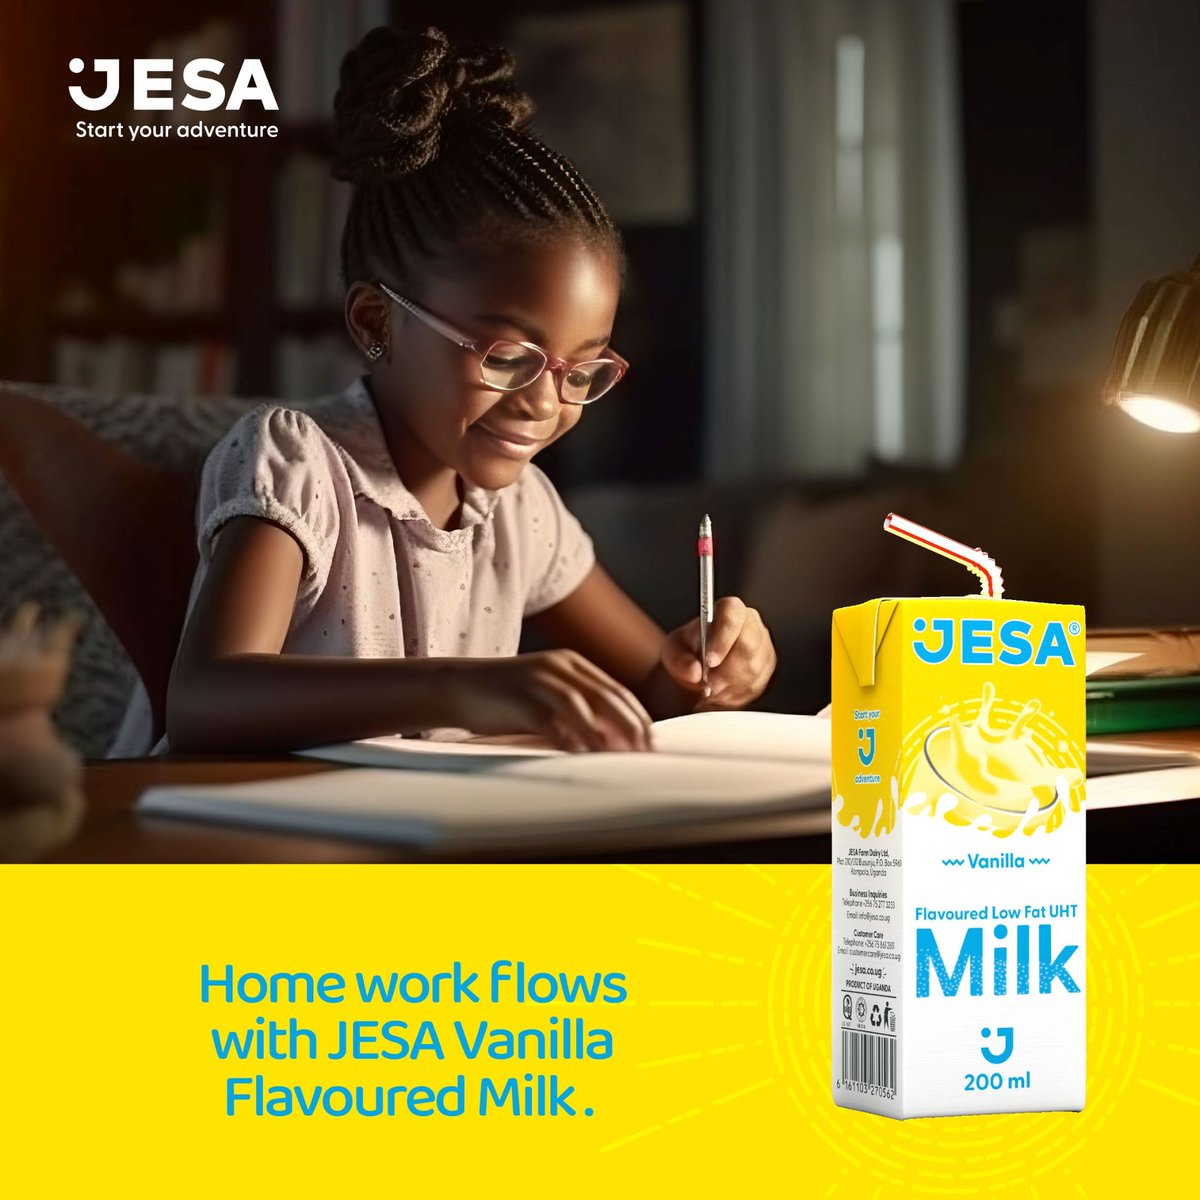 Milk contains Vitamin D which is very essential for your child’s brain development. Treat her to a JESA Flavoured milk as she gets her work done. #JESAStartYourAdventure